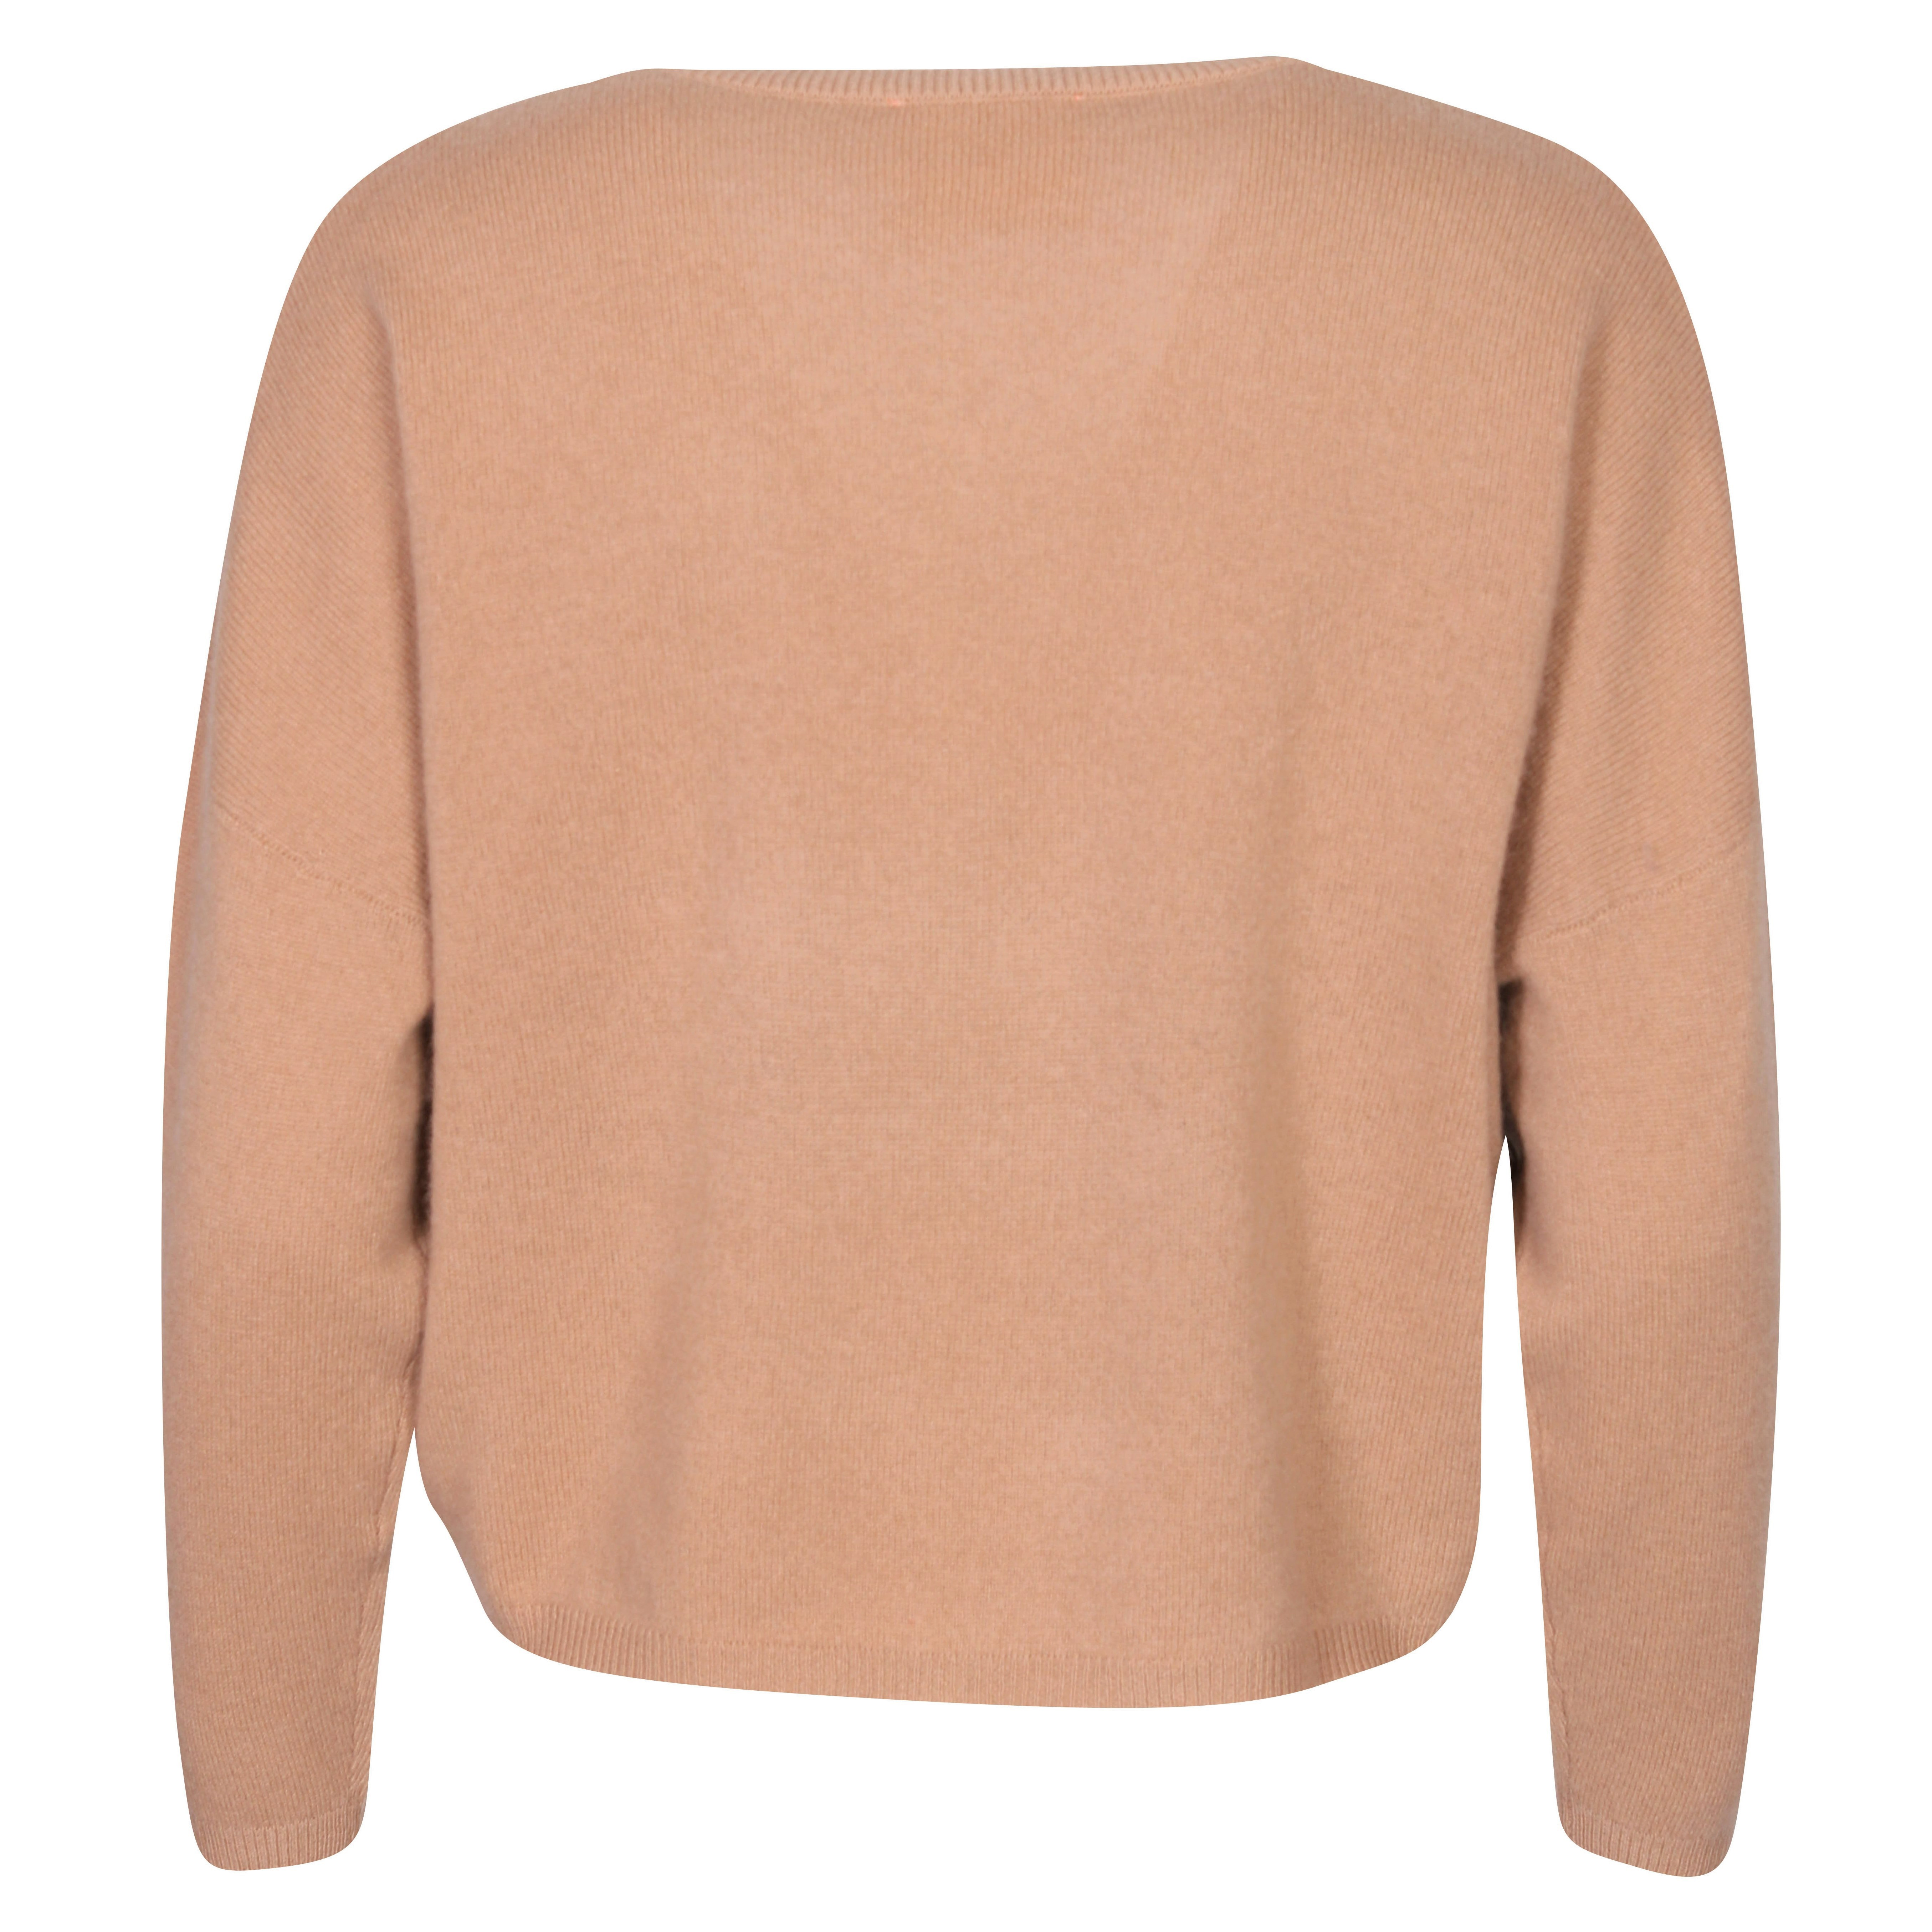 Absolut Cashmere Alicia Pullover in Camel S